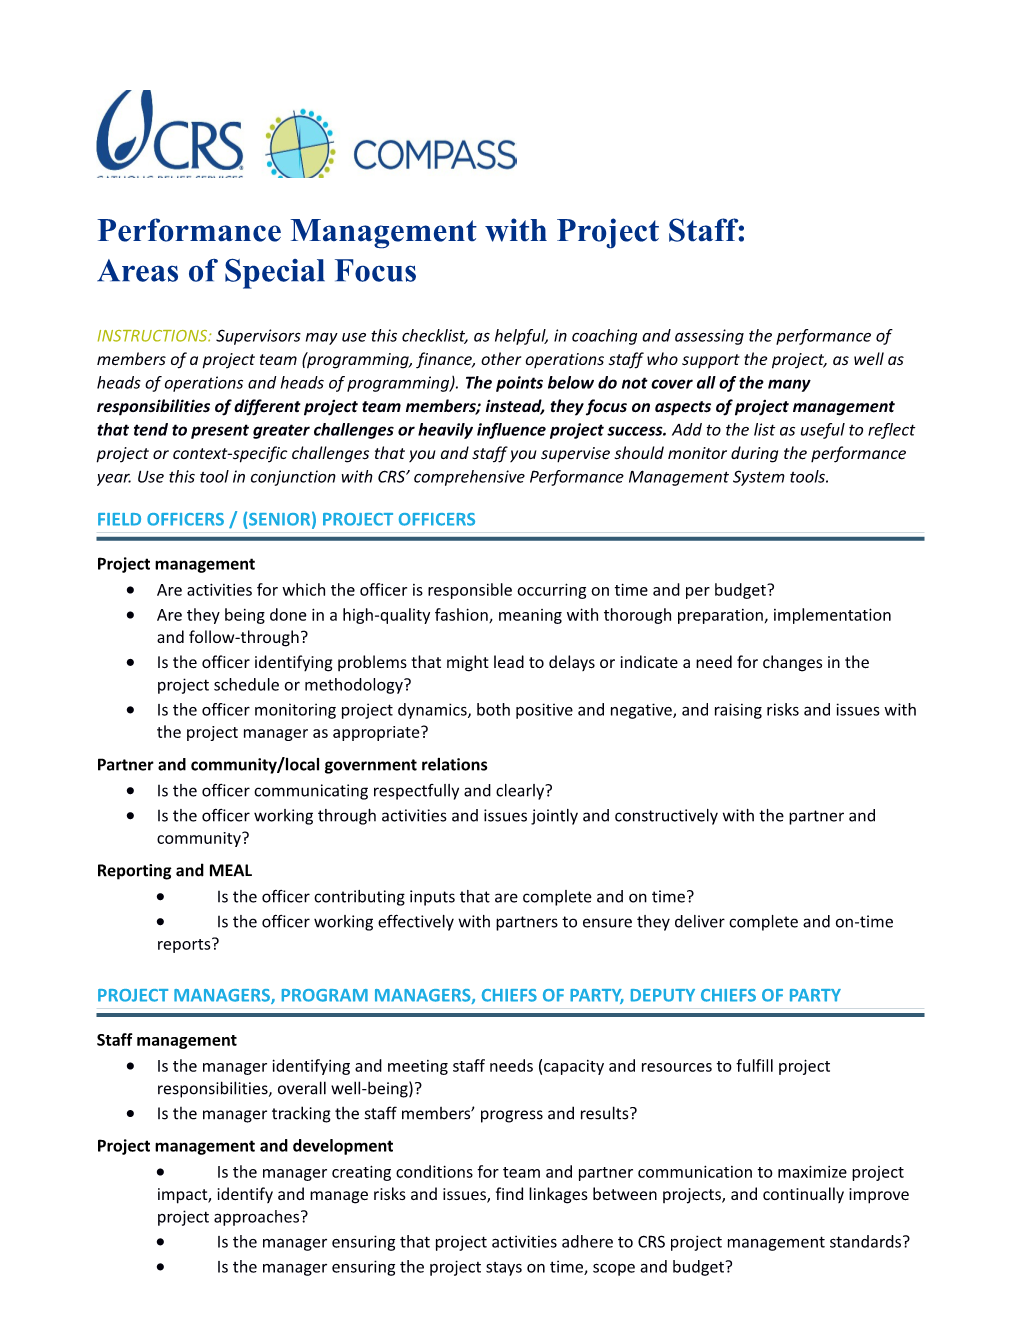 Performance Management with Project Staff